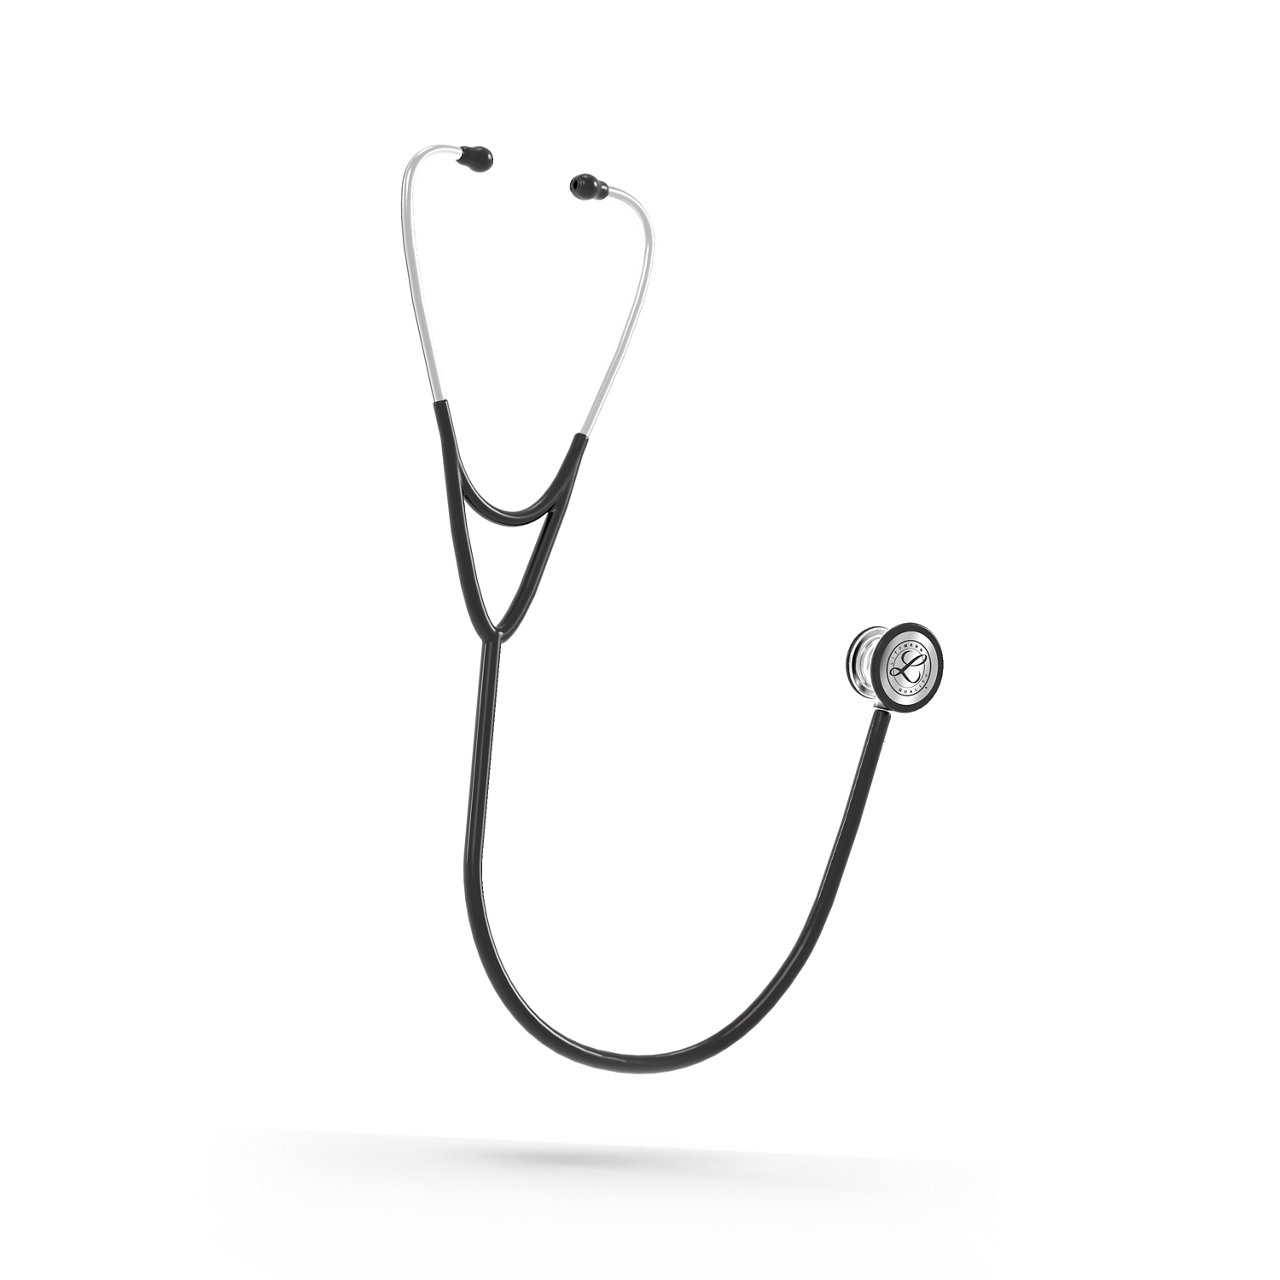 Rendered image of the 3M� Littmann� Cardiology IV� Diagnostic Stethoscope.